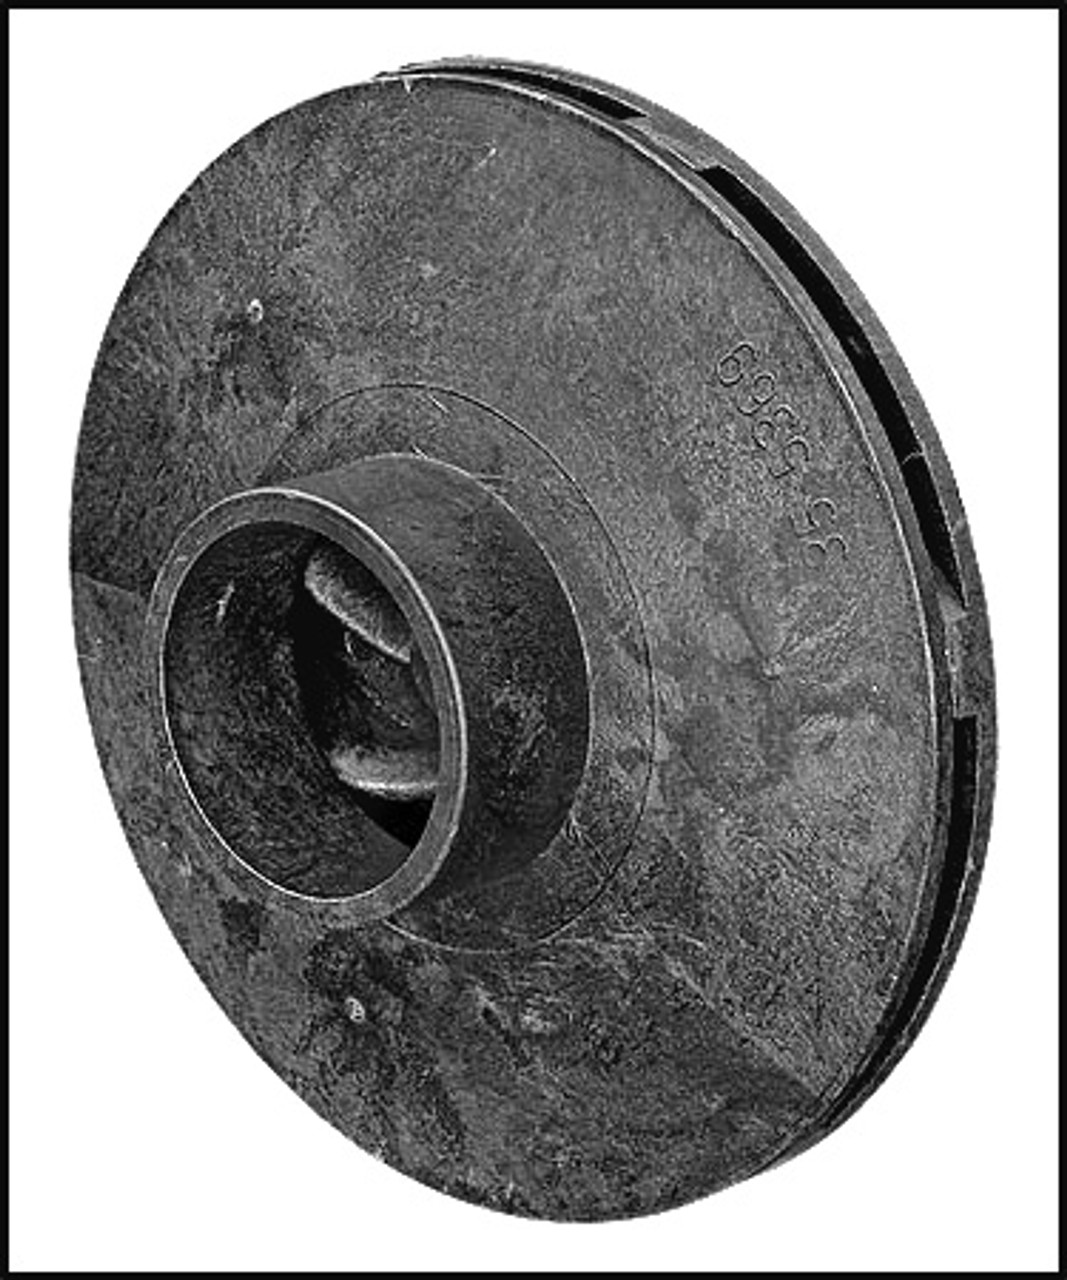 Pentair/Pacfab Impeller For Challenger 1 Full Rated 1-1/2 HP Pump (#355369)